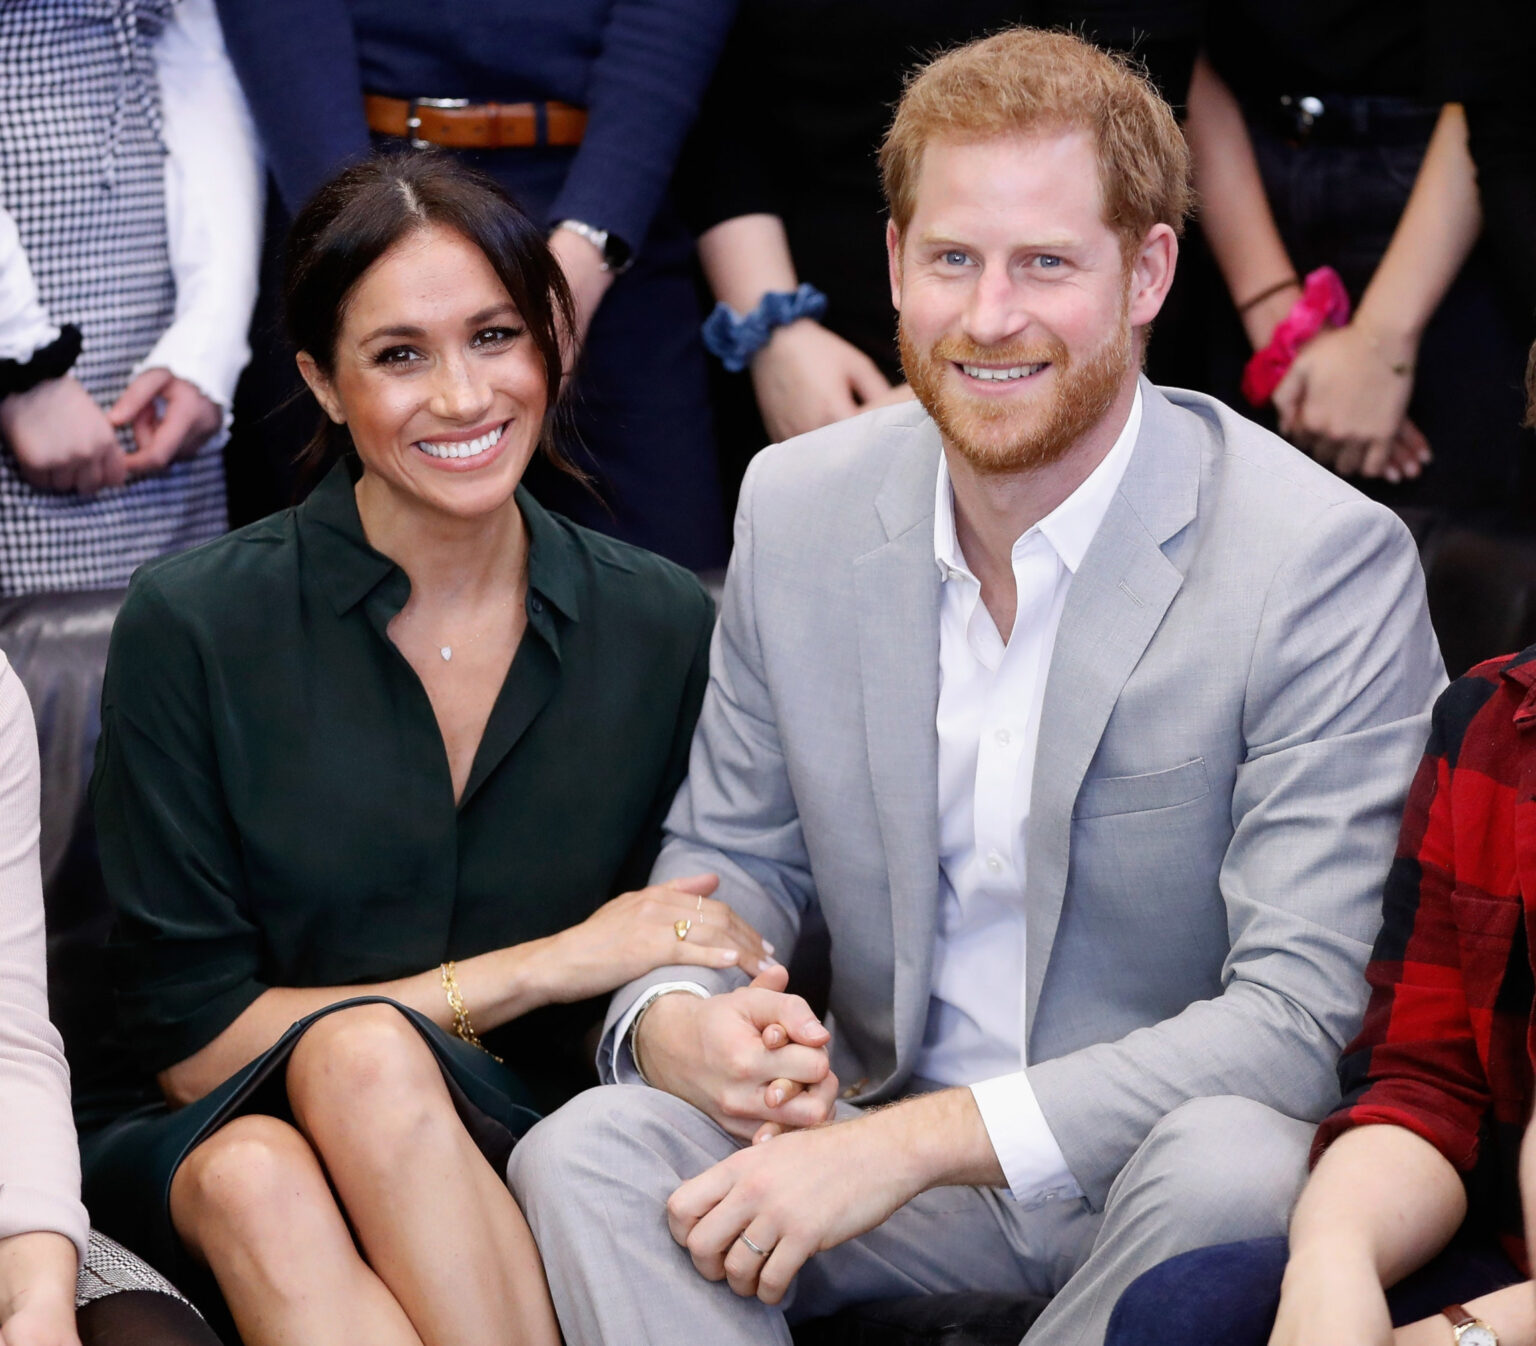 Does Prince Harry regret leaving the royal family? Dive into one royal expert's take on his relationship with Meghan Markle and see for yourself.